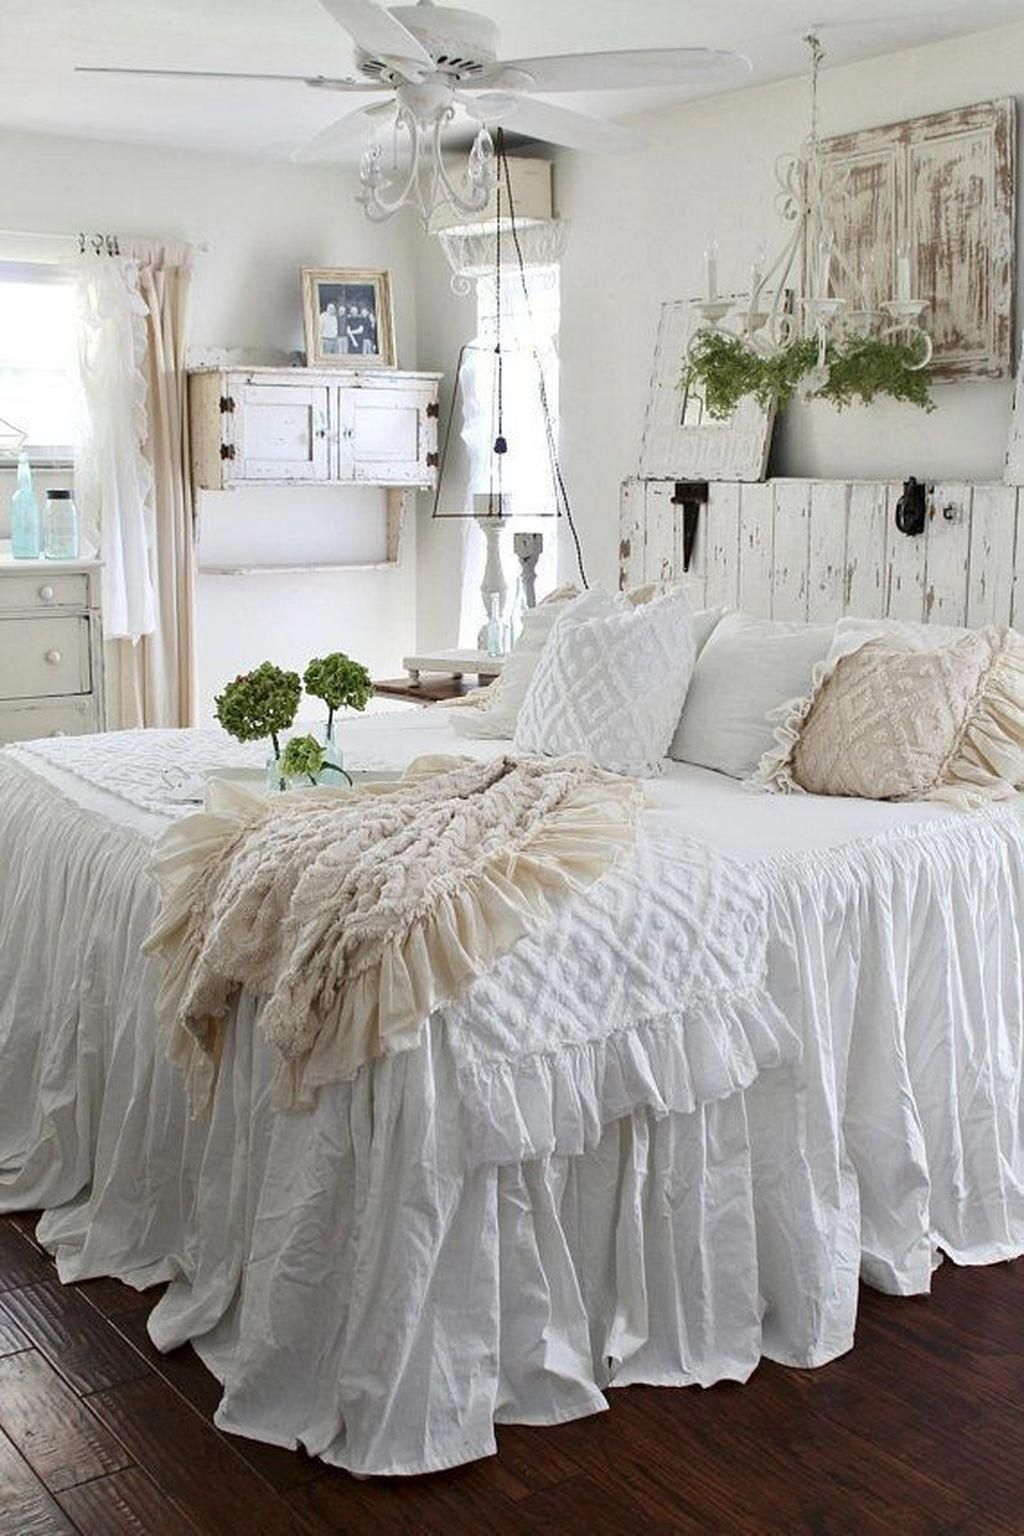 White Shabby Chic Bedroom
 23 Most Beautiful Shabby Chic Bedroom Ideas